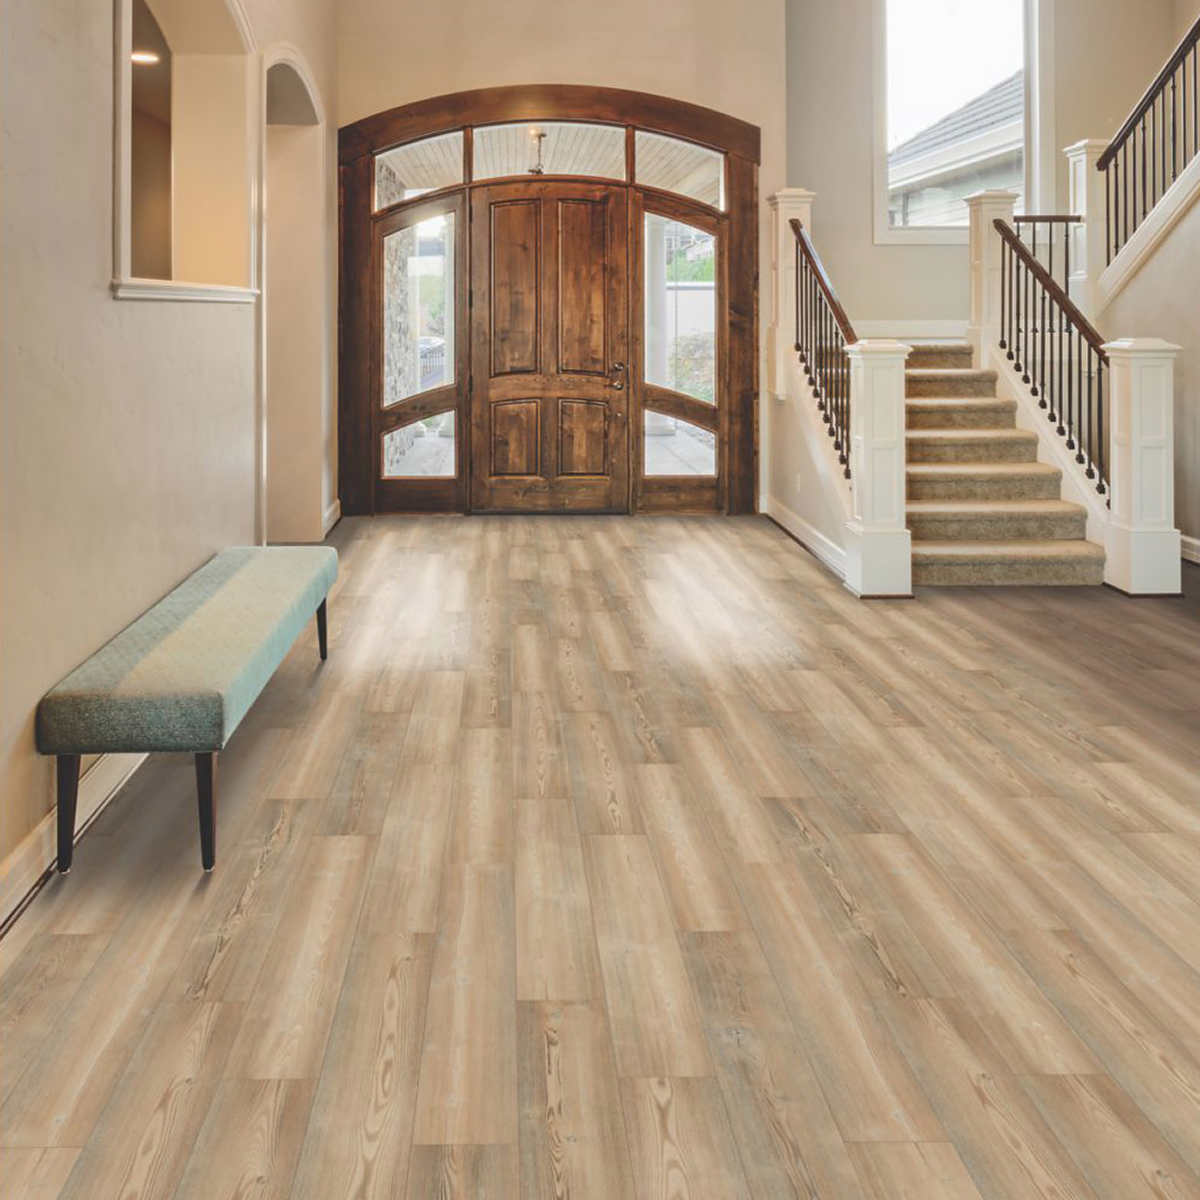 Mohawk Home Tallulah Pine Waterproof Rigid 5mm Thick Luxury Vinyl Plank Flooring 1mm Attached Pad Included Costco